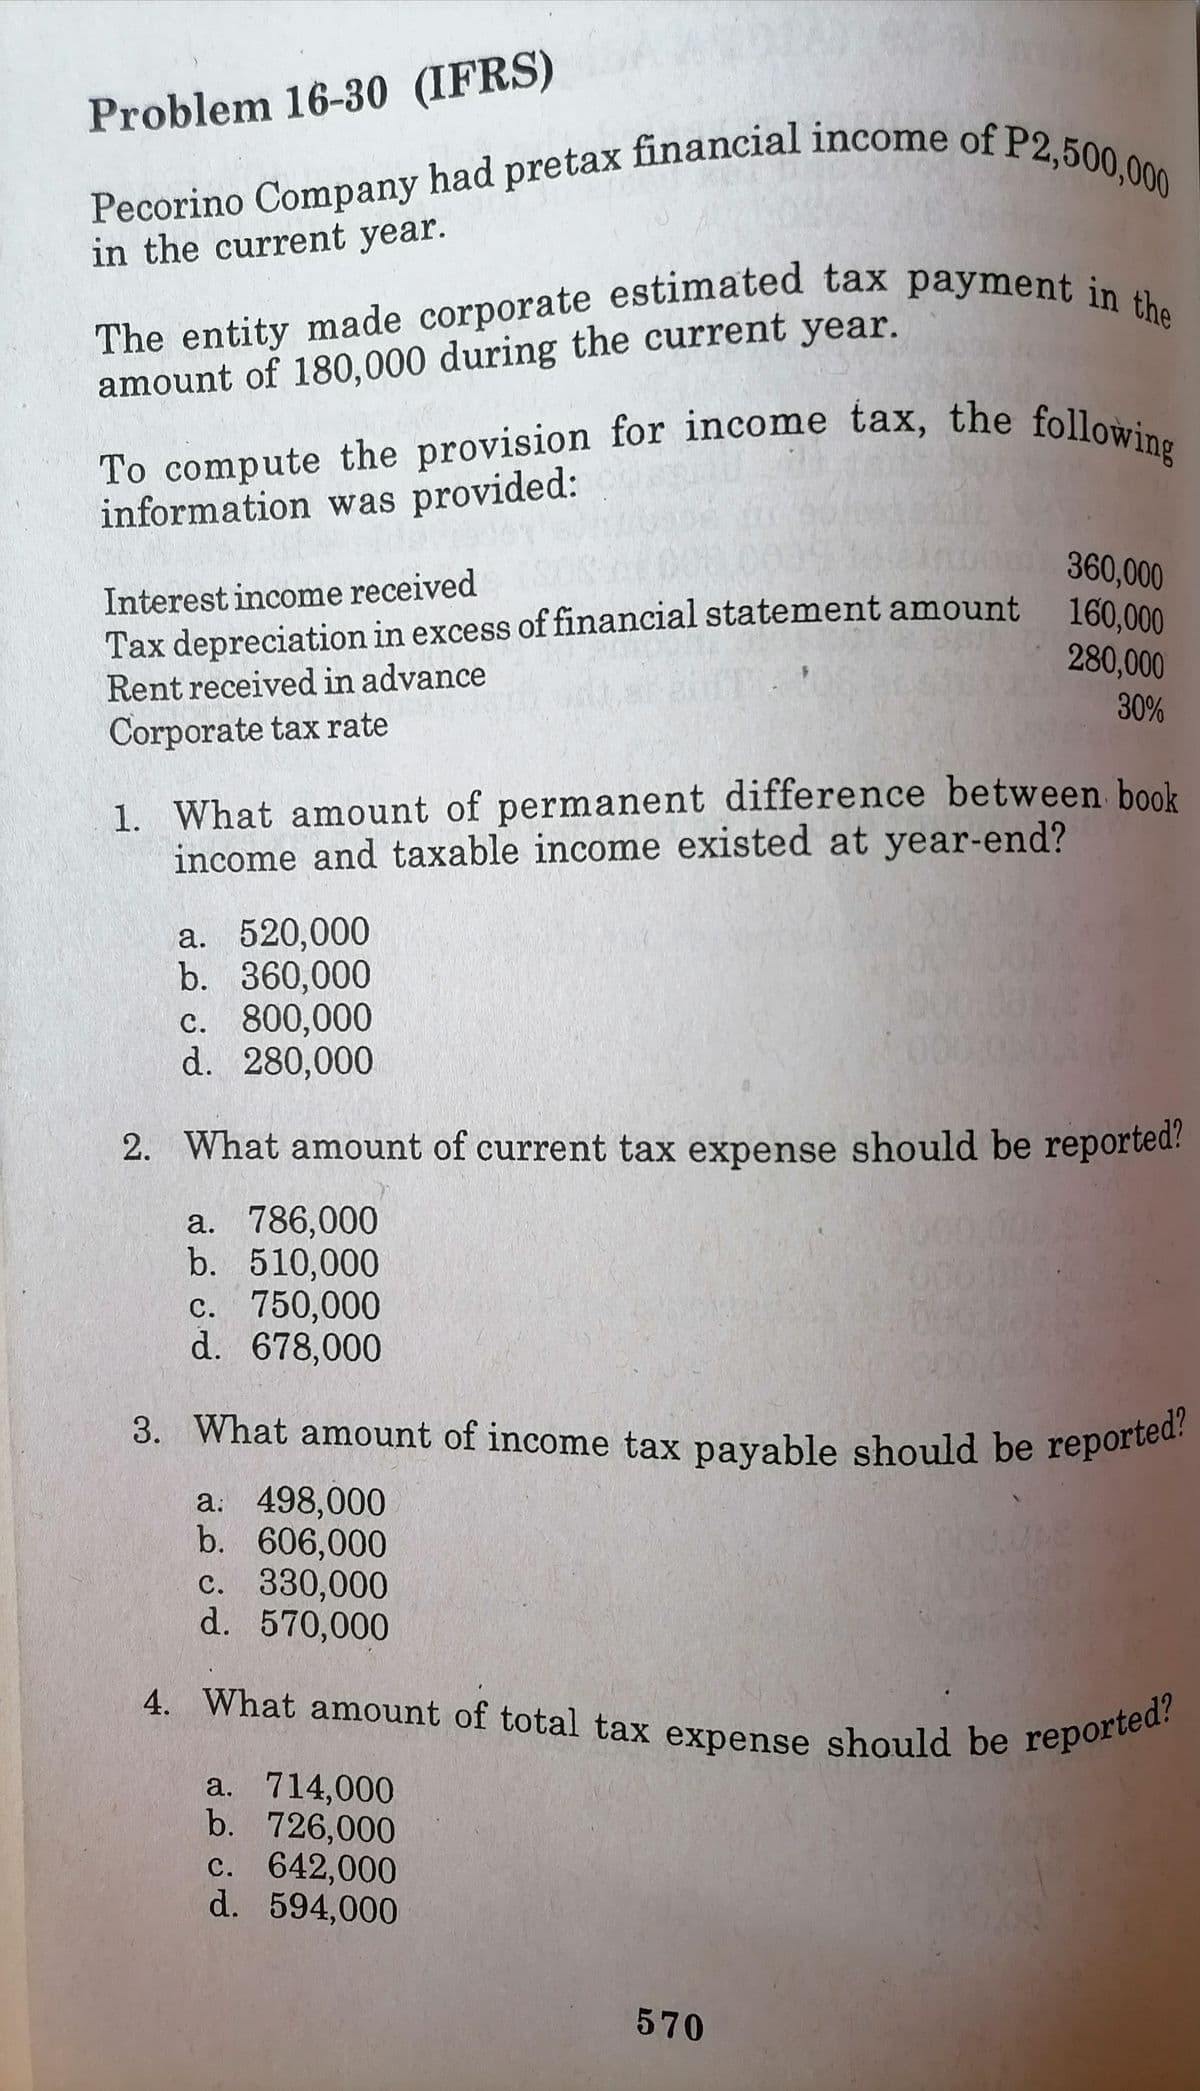 The entity made corporate estimated tax payment in the
To compute the provision for income tax, the following
Tax depreciation in excess of financial statement amount 160,000
Pecorino Company had pretax financial income of P2,500,000
3. What amount of income tax payable should be reported?
4. What amount of total tax expense should be reported?
Problem 16-30 (IFRS)
in the current year.
amount of 180,000 during the current year.
information was provided:
360,000
Interest income received
Tax depreciation in excess of financial statement amount
Rent received in advance
Corporate tax rate
280,000
30%
1. What amount of permanent difference between book
income and taxable income existed at year-end?
a. 520,000
b. 360,000
c. 800,000
d. 280,000
2. What amount of current tax expense should be reported?
a. 786,000
b. 510,000
c. 750,000
d. 678,000
000,00
a: 498,000
b. 606,000
c. 330,000
d. 570,000
4. What amount of total tax expense should be repor0
a. 714,000
b. 726,000
c. 642,000
d. 594,000
570
